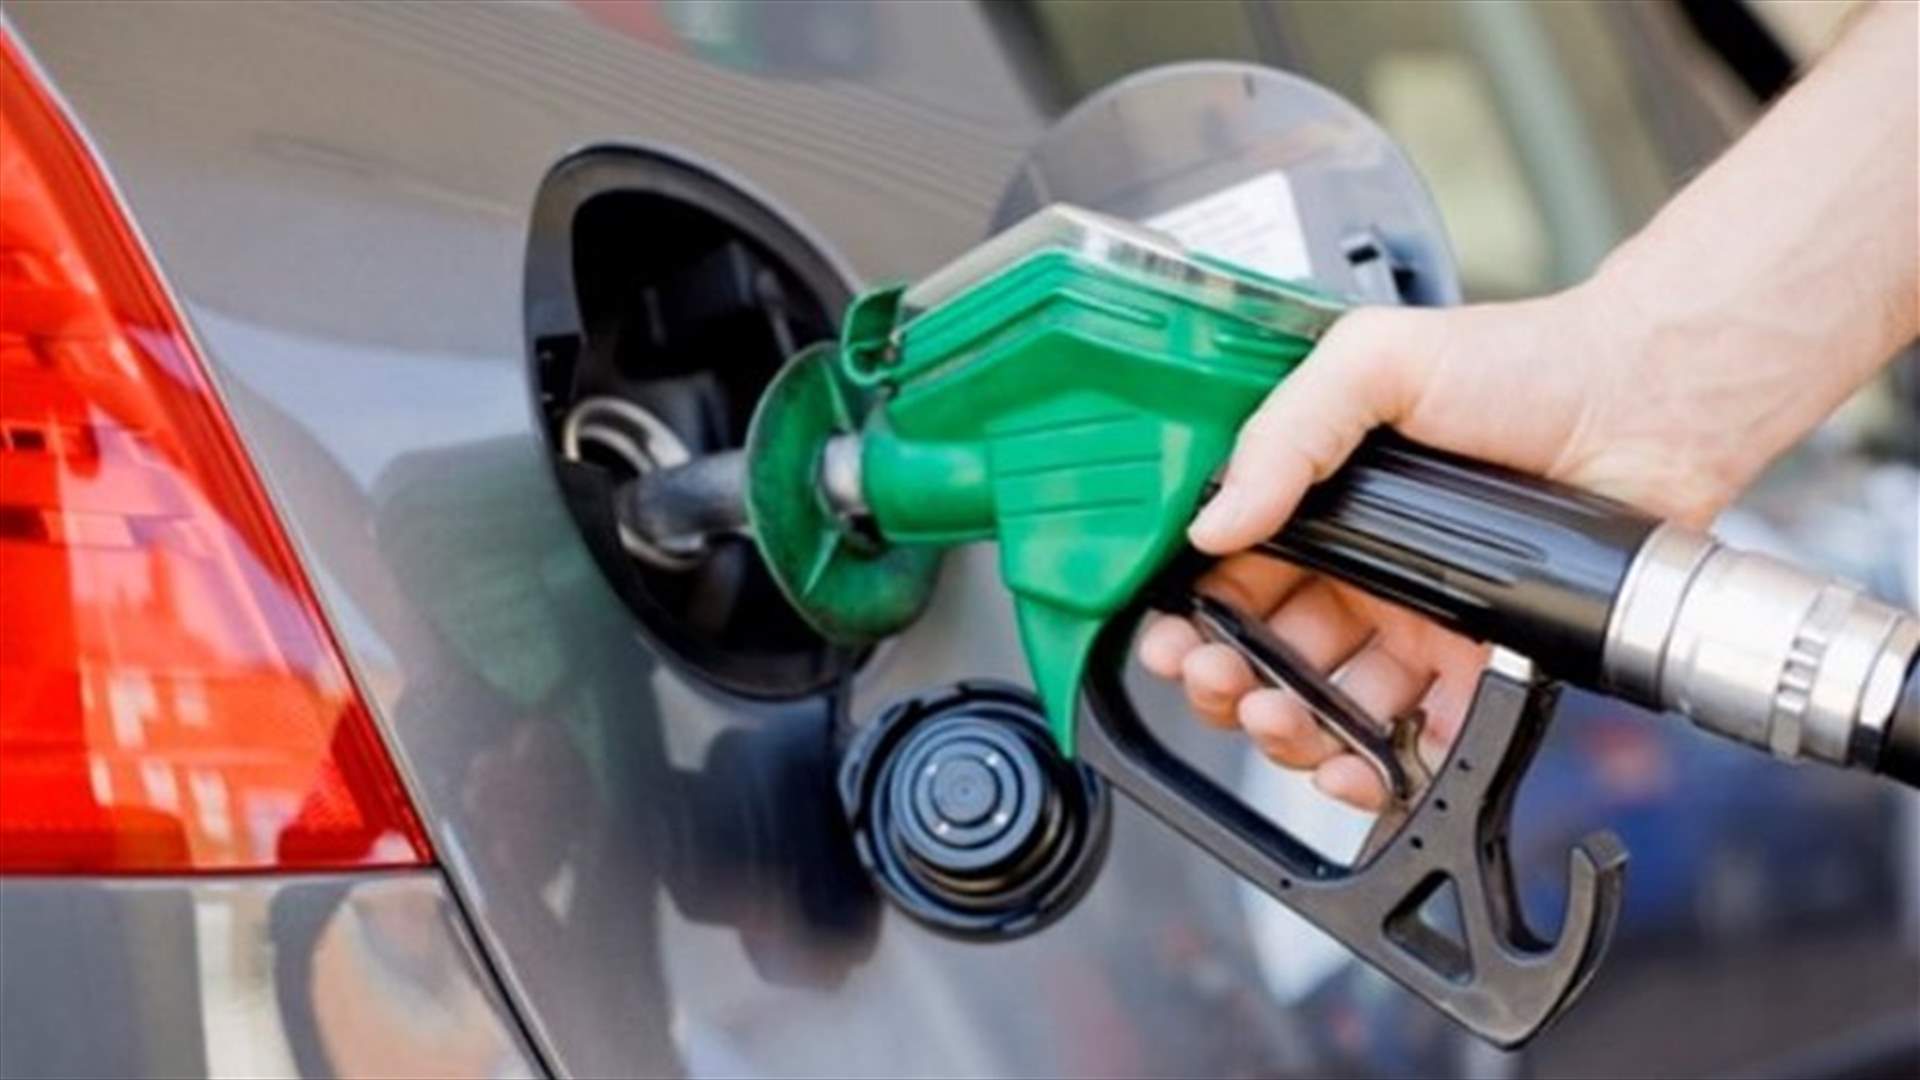 Fuel prices in Lebanon witness further increase